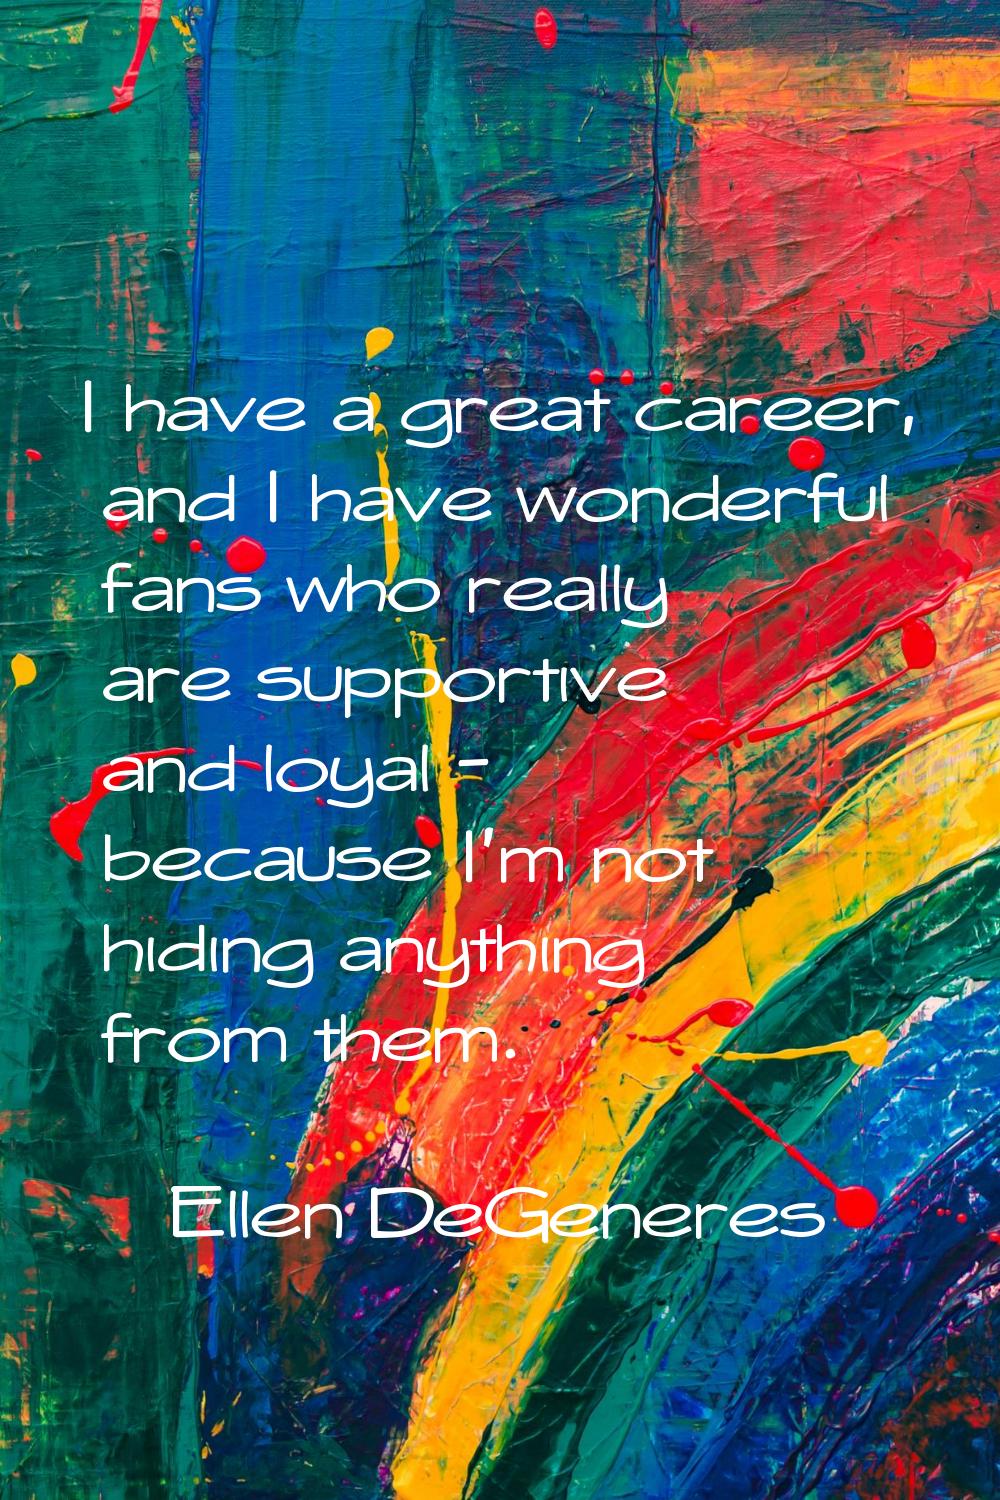 I have a great career, and I have wonderful fans who really are supportive and loyal - because I'm 